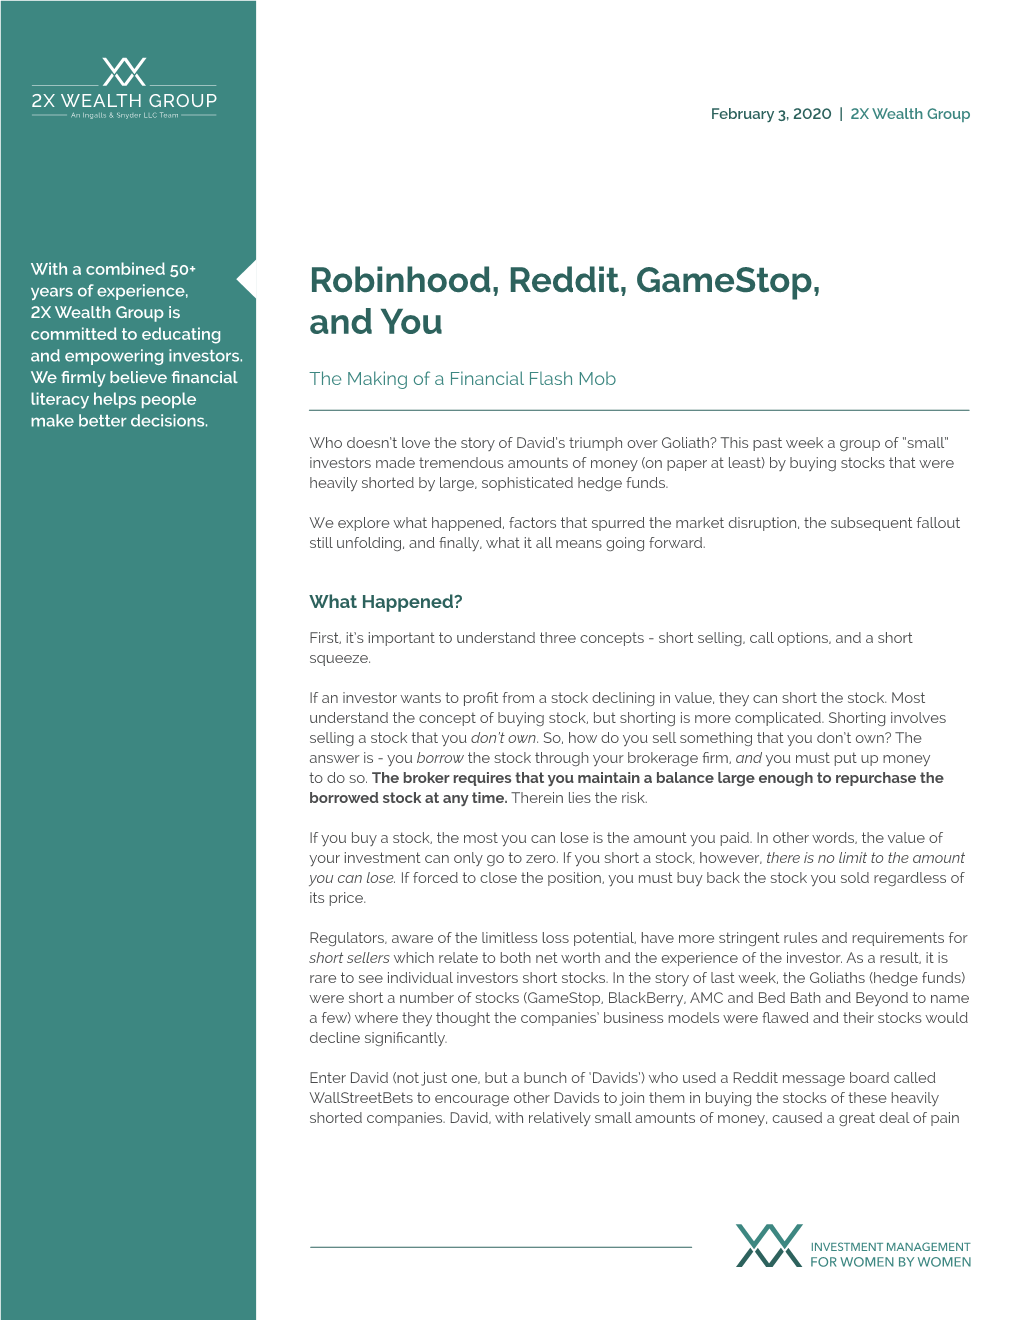 Robinhood, Reddit, Gamestop, and You | 2X Wealth Group to the Sophisticated Goliaths Who Were Short These Stocks